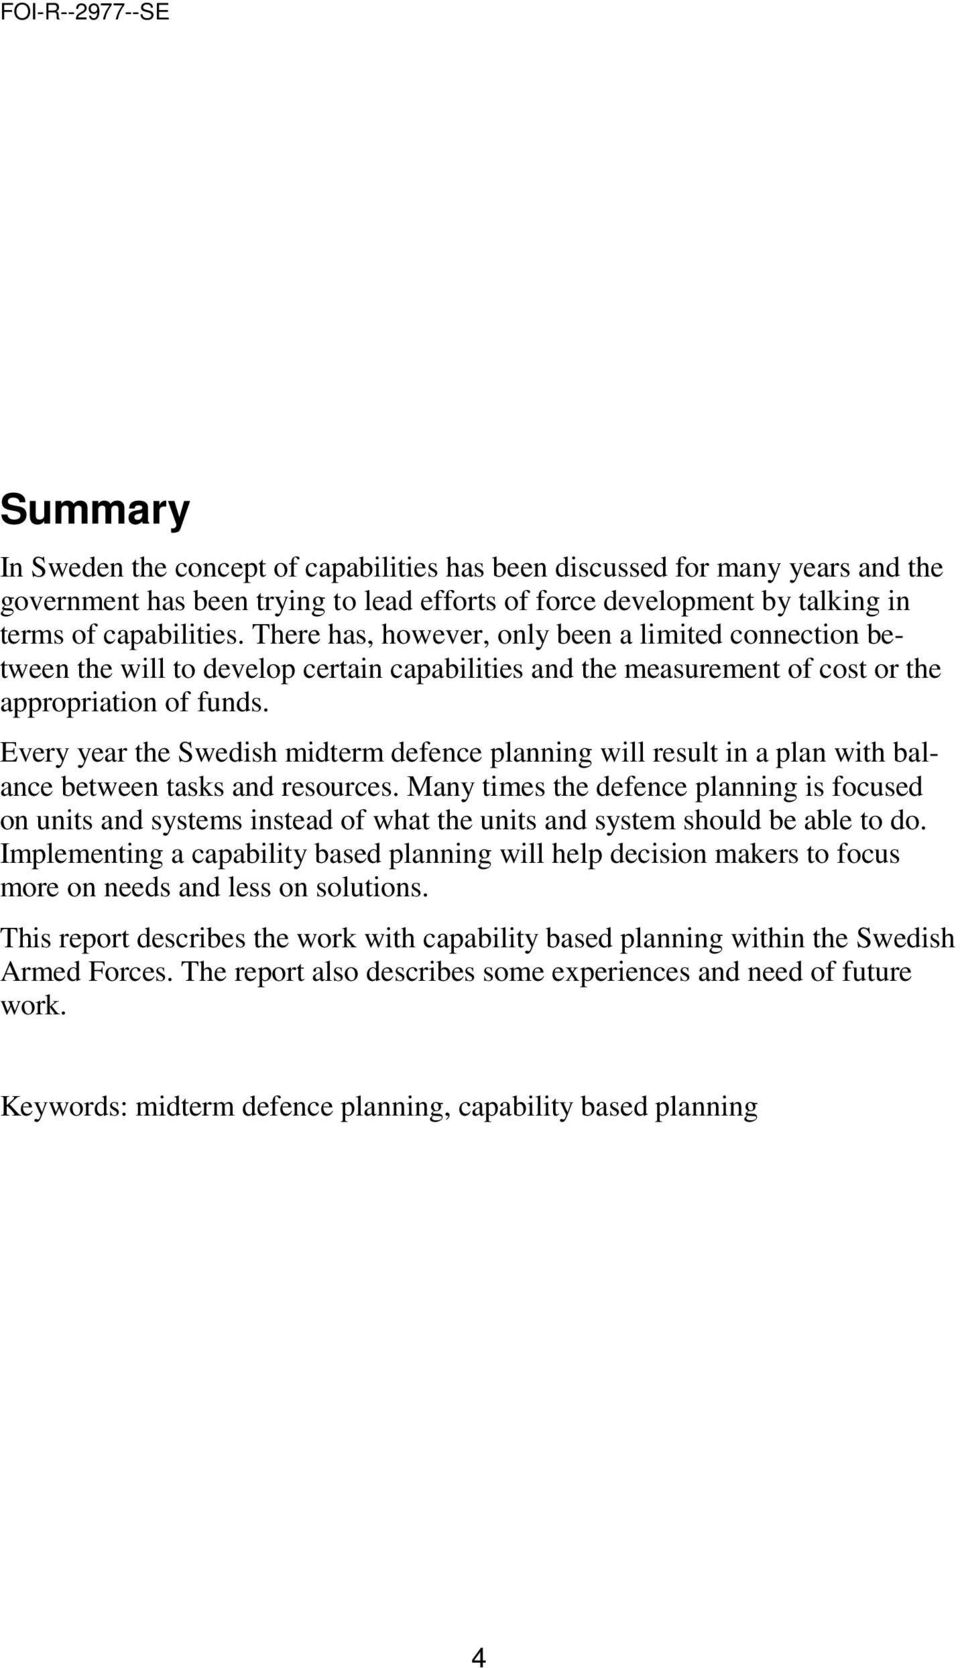 Every year the Swedish midterm defence planning will result in a plan with balance between tasks and resources.